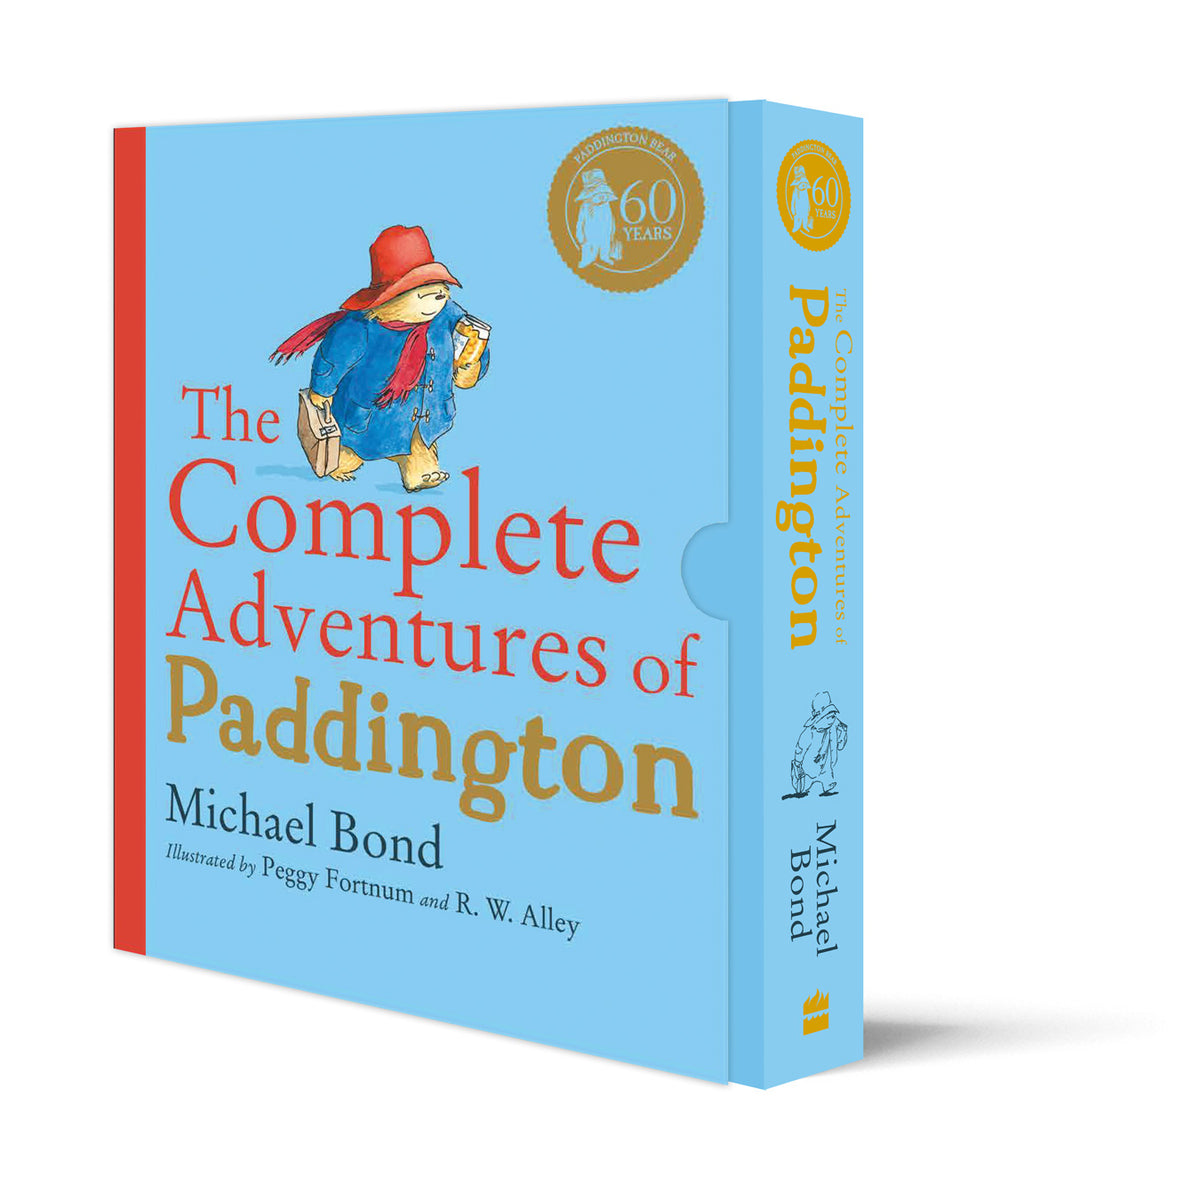 The Complete Adventures of Paddington: The 15 Complete and Unabridged Novels in One Volume (Hardback)